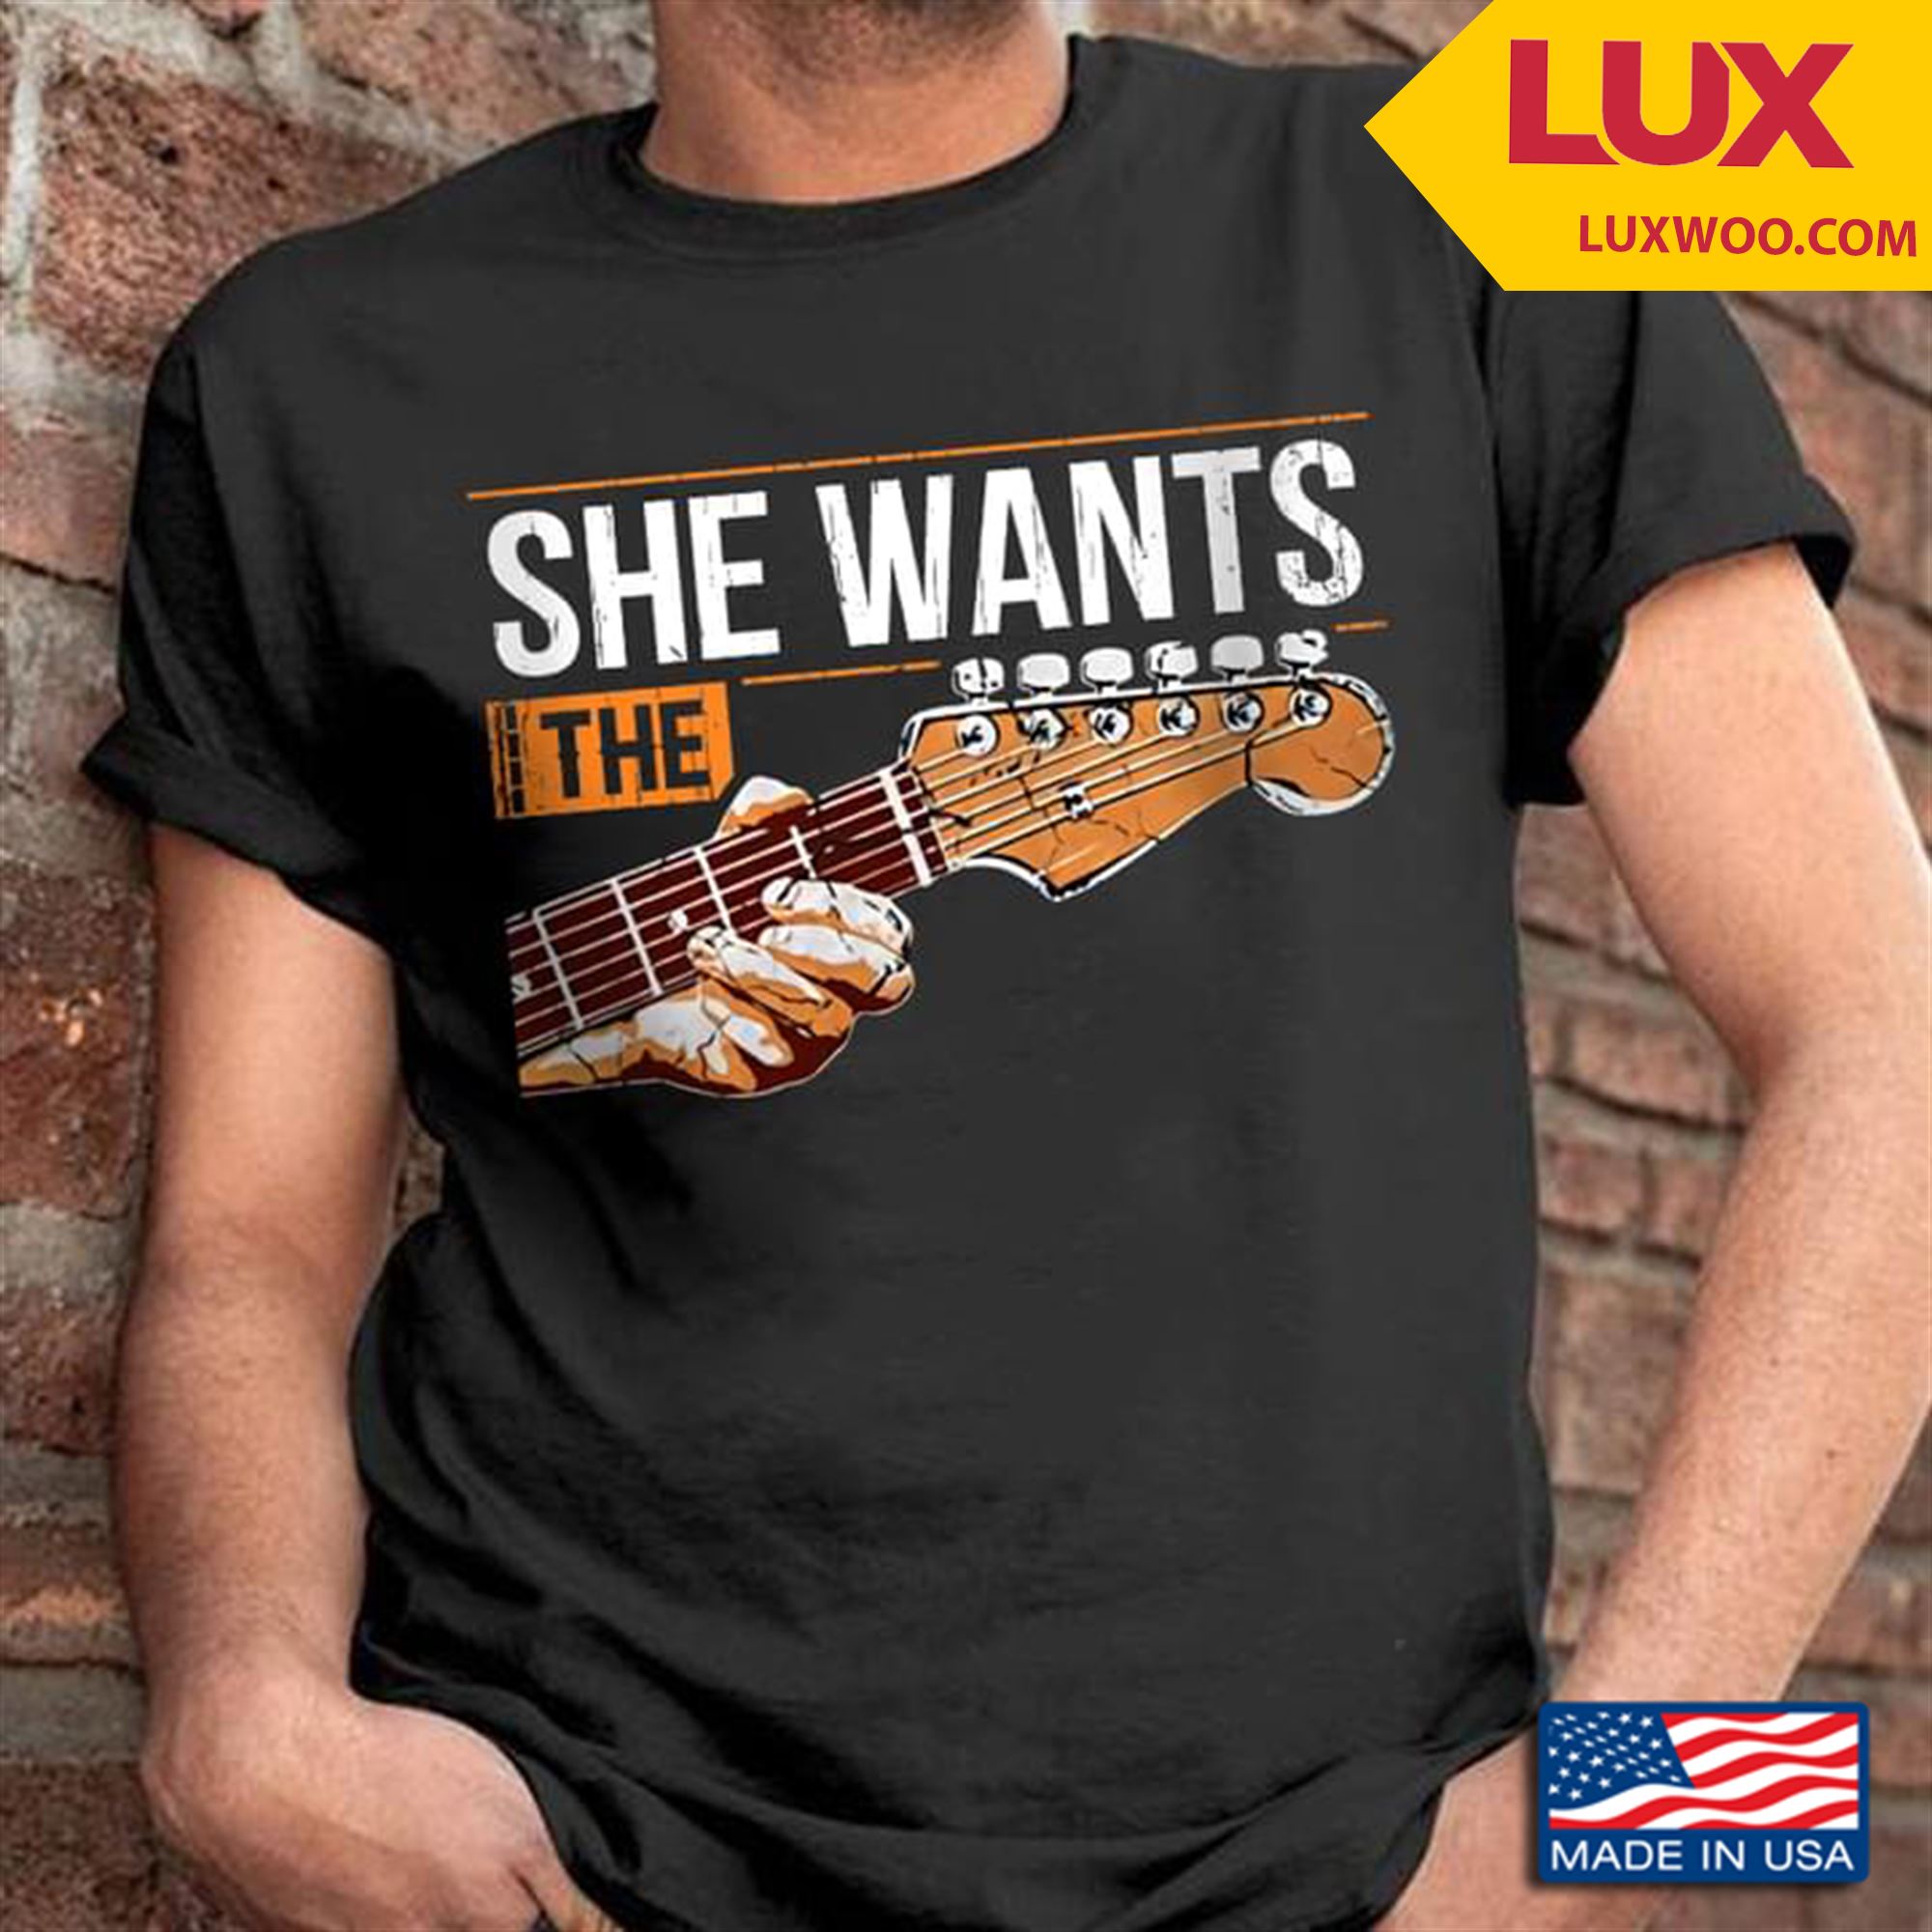 She Wants The Guitar Guitar Lovers Shirt Size Up To 5xl